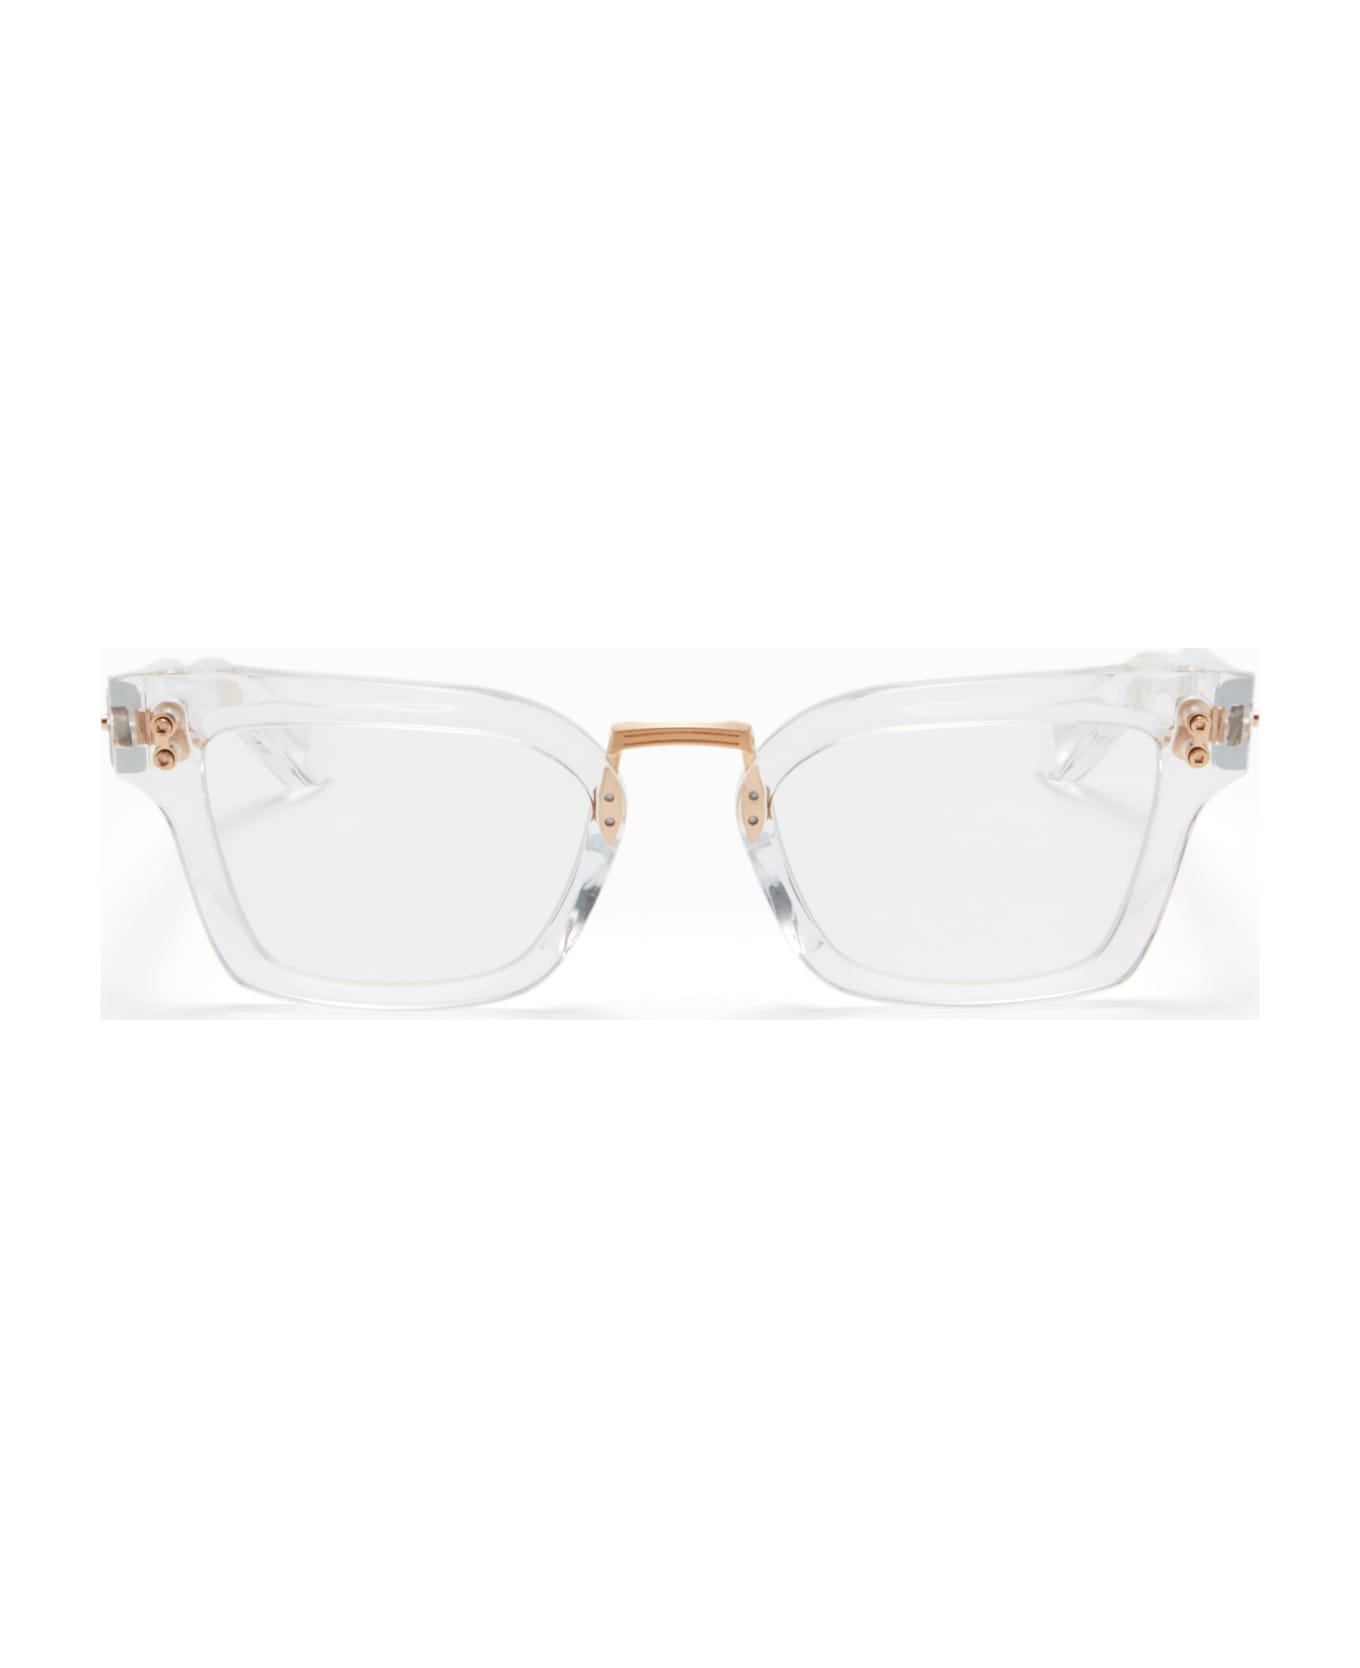 Akoni Luna - Crystal Clear / Brushed White Gold Rx Glasses - crystal clear